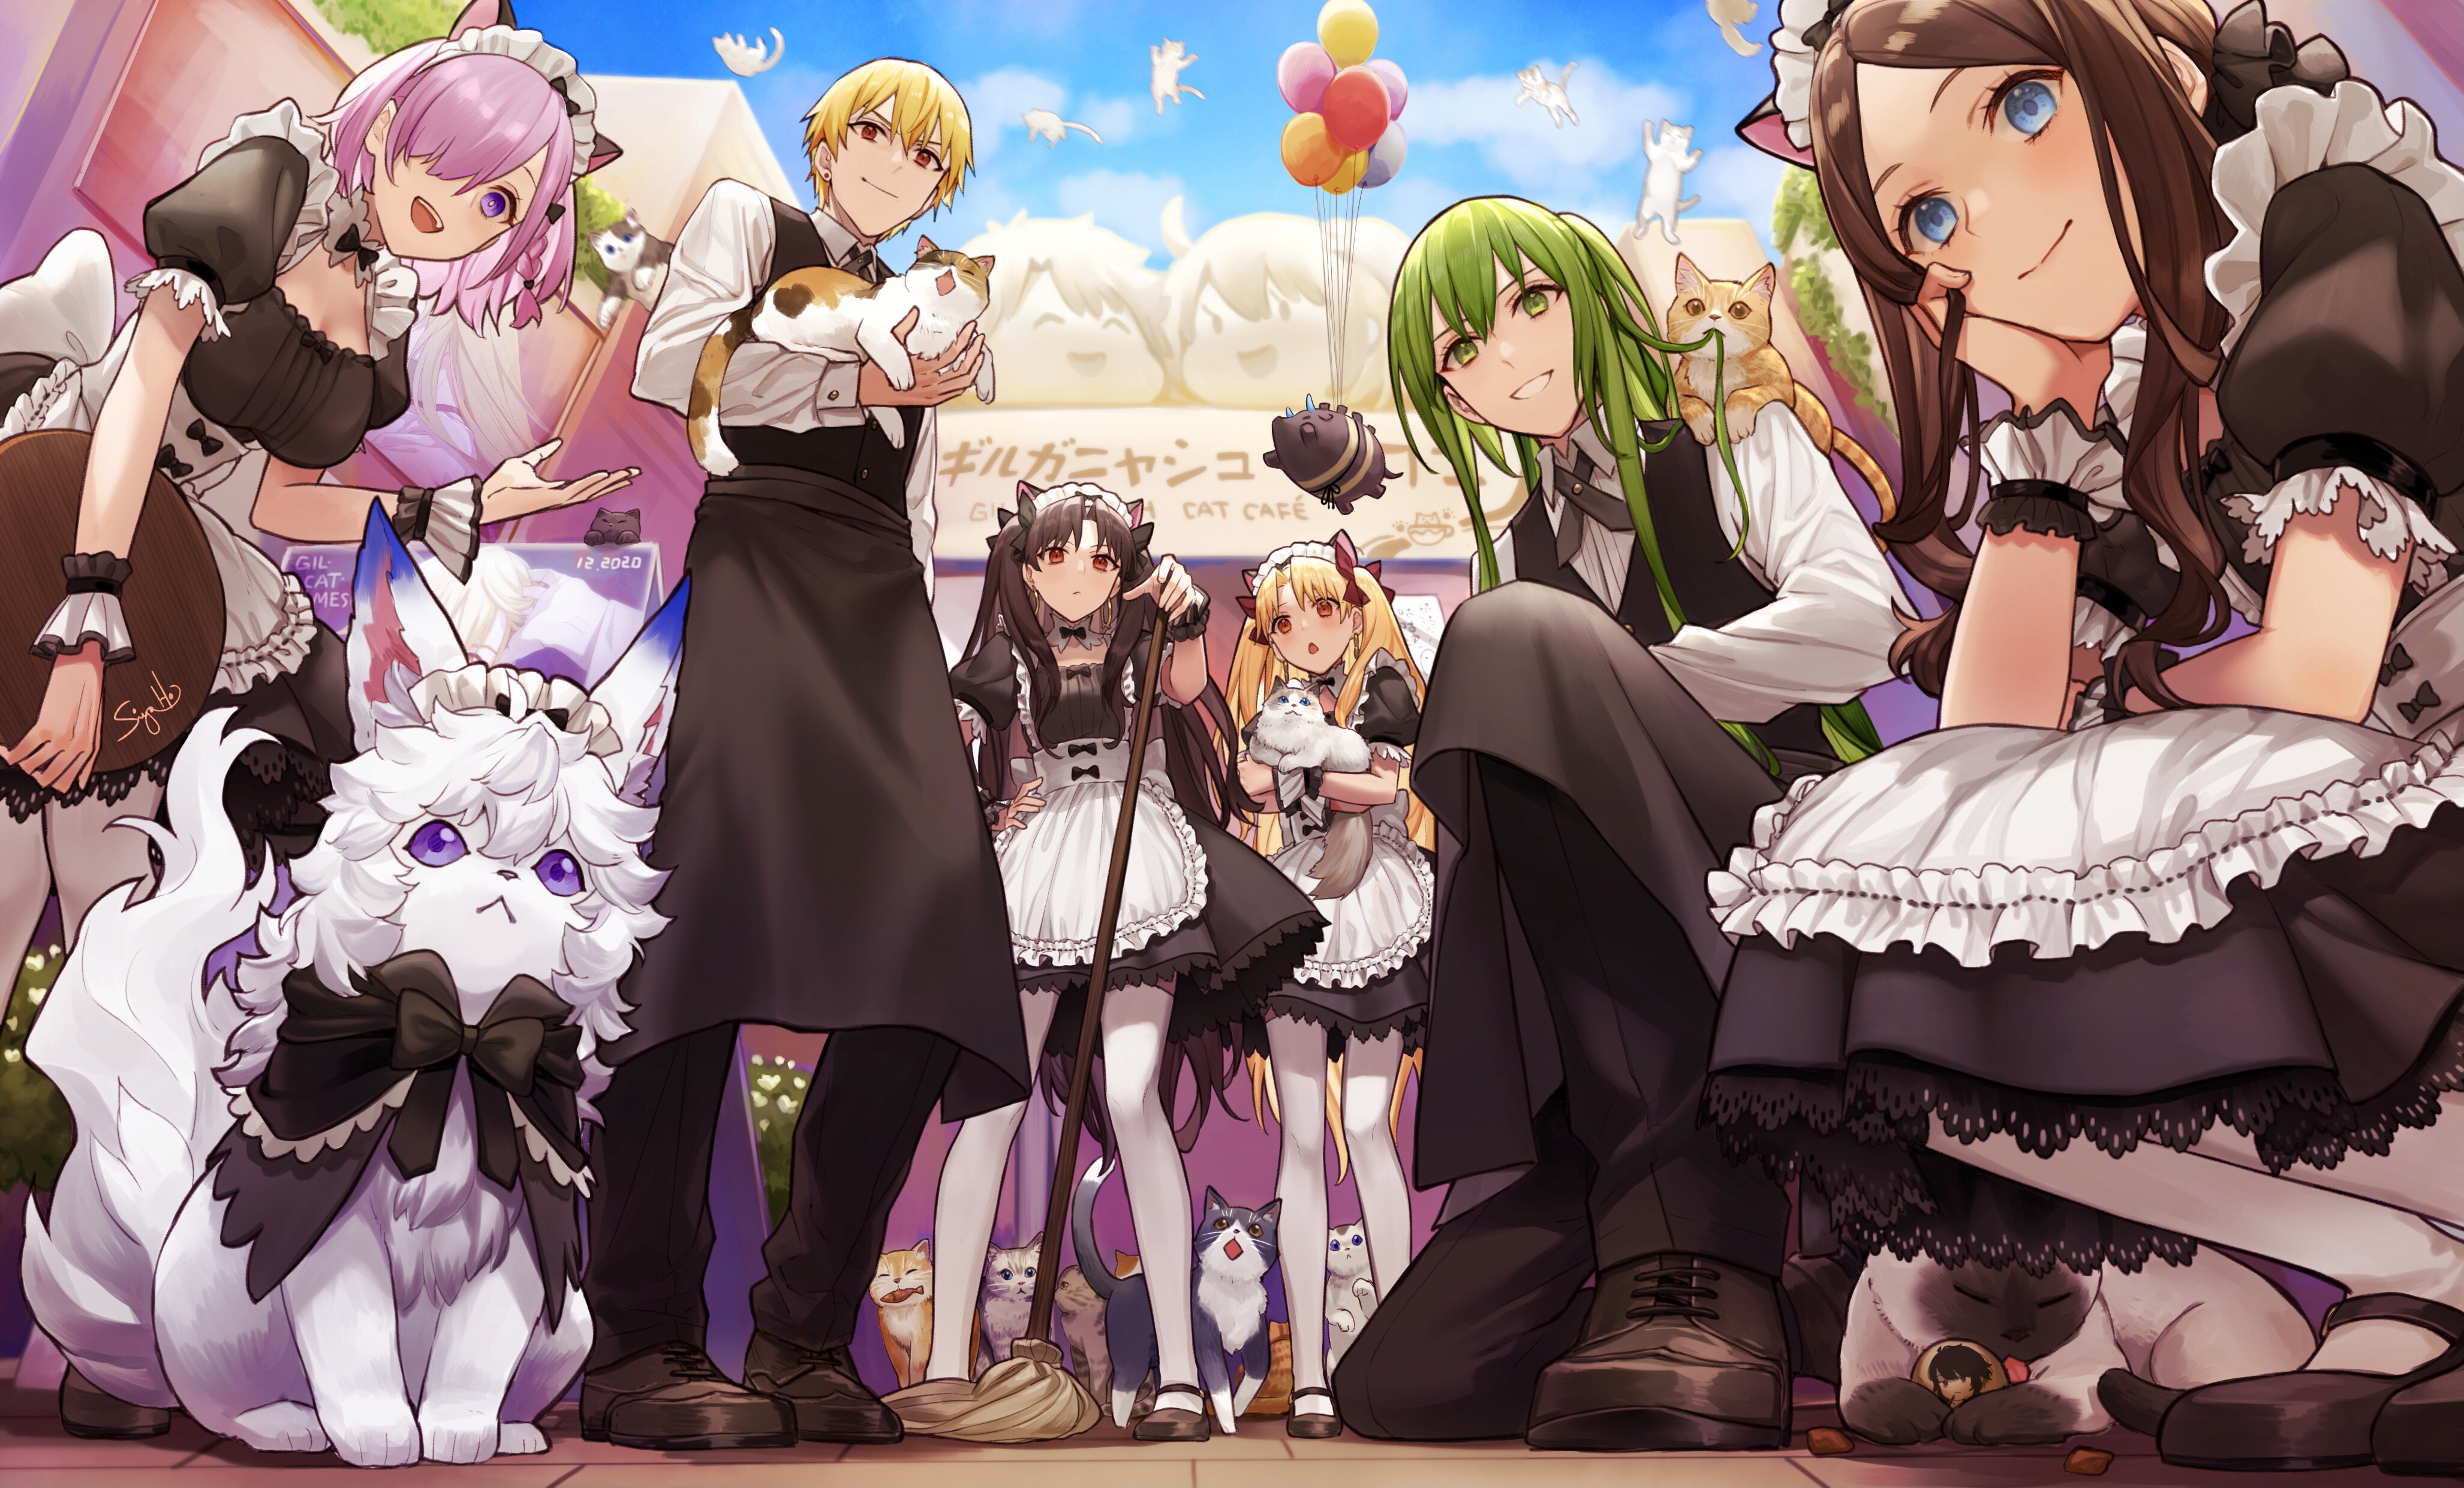 Anime 4109x2481 Fate series Fate/Grand Order Mash Kyrielight Leonardo Da Vinci (FGO) Ishtar (Fate/Grand Order) Ereshkigal (Fate/Grand Order) Enkidu (FGO) Gilgamesh Siya Ho maid outfit anime boys anime girls cats 2D anime Fou (Fate/Grand Order) ponytail white stockings thighs big boobs small boobs fake animal ears open mouth parted lips smiling low-angle looking at viewer long hair short hair women outdoors men outdoors alternate costume twintails fan art